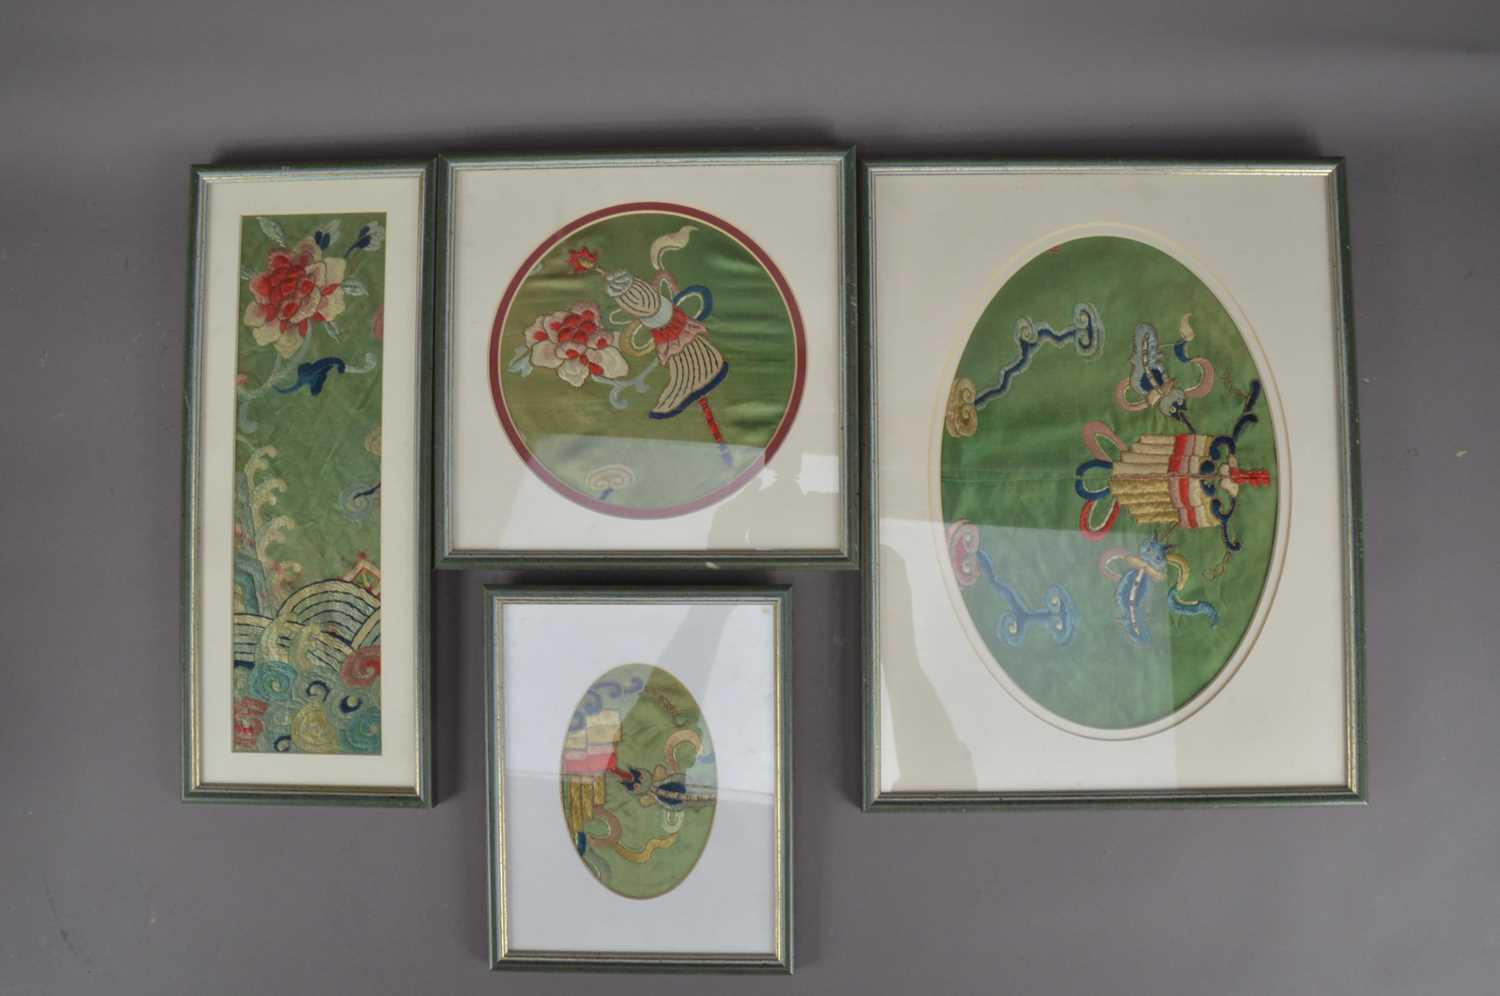 Lot 252 - A set of four late 19th/early 20th century Chinese Peking knot framed fabrics